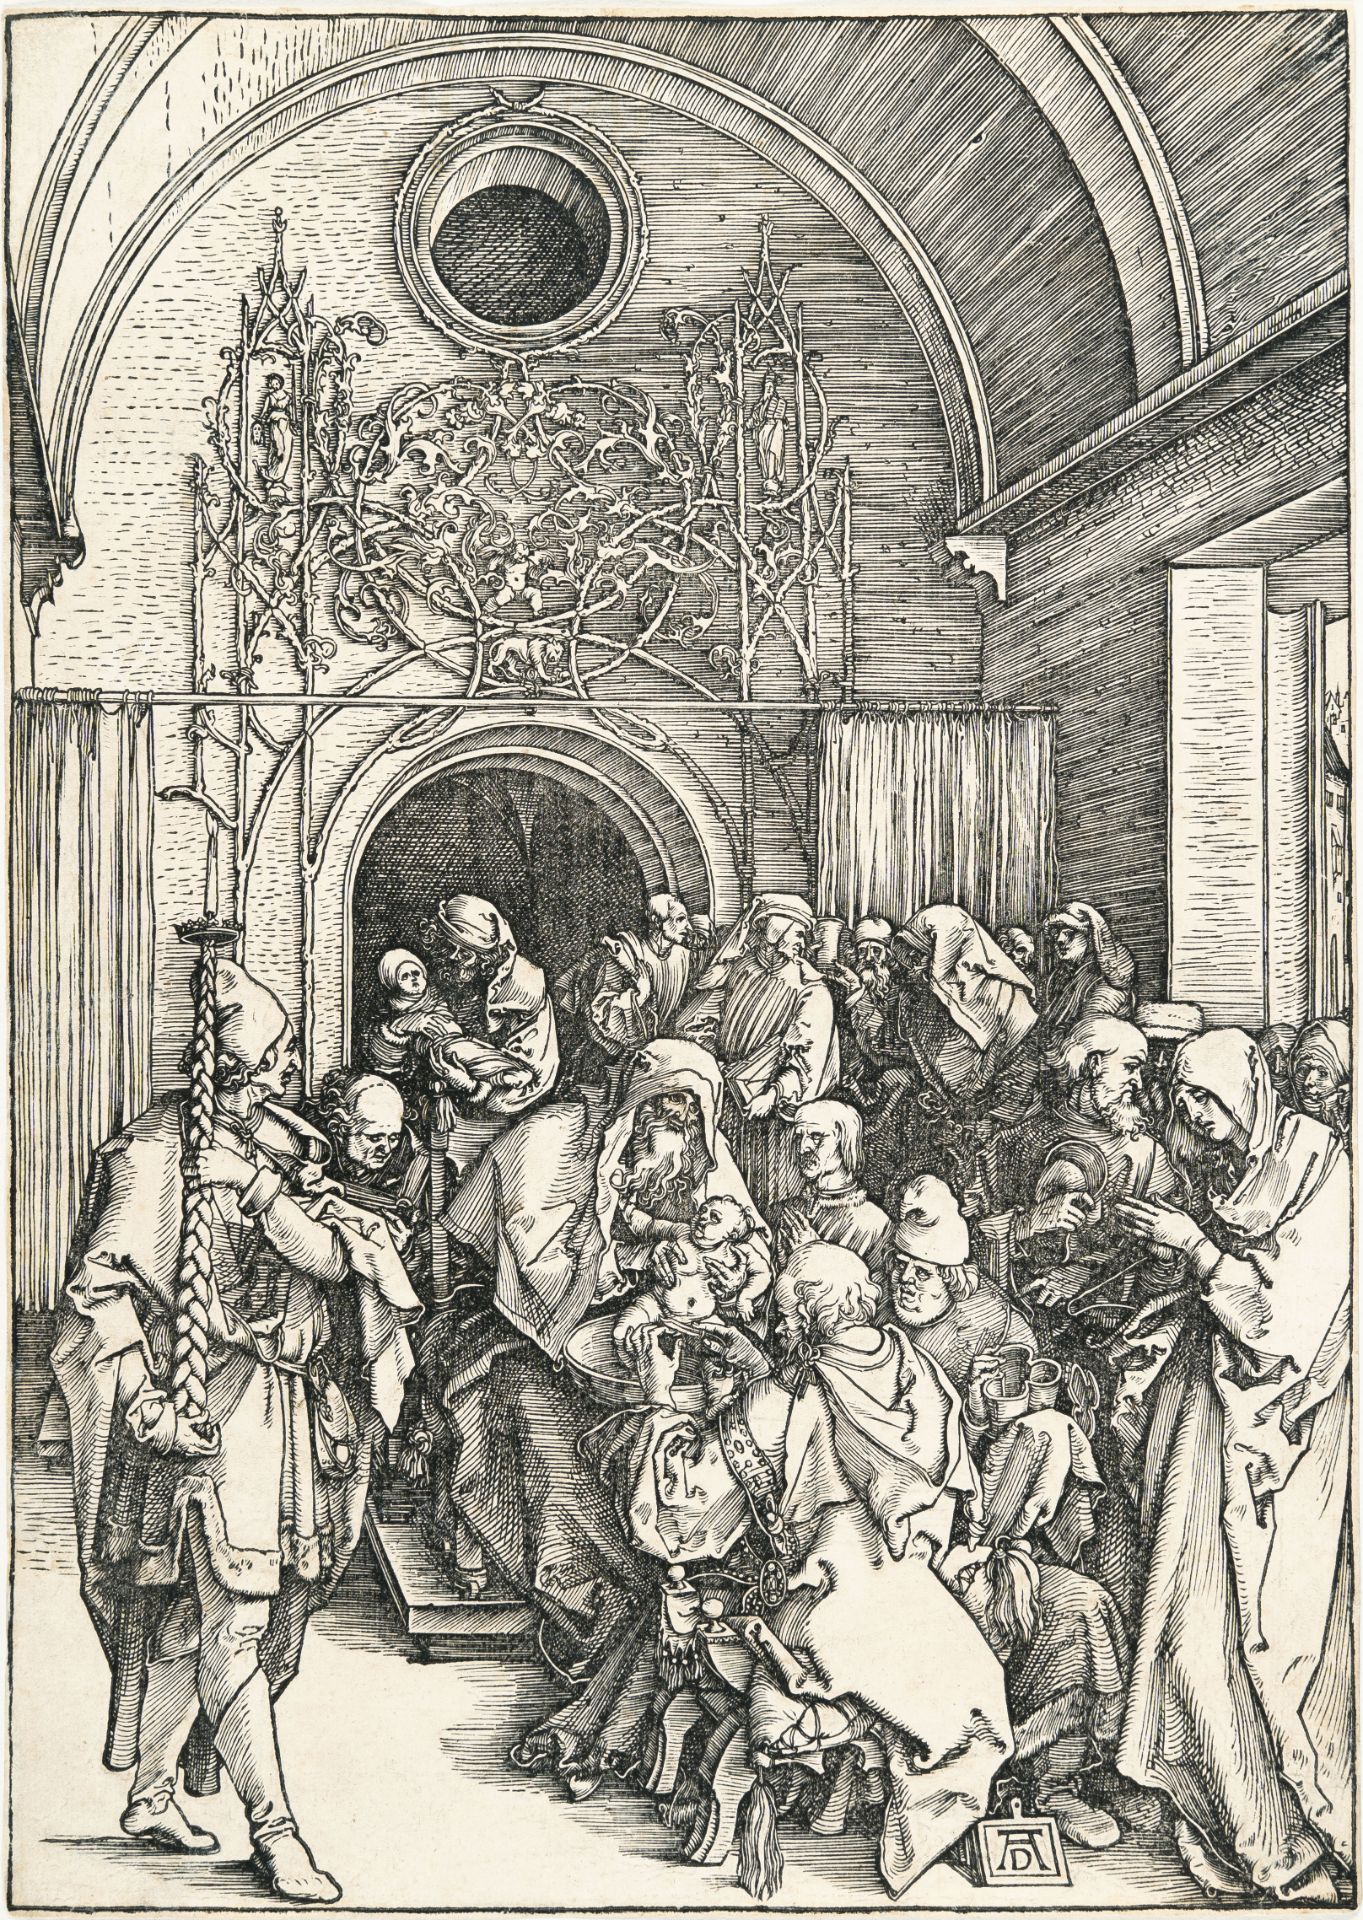 Albrecht Dürer, The circumcision of Christ.Woodcut on laid paper with watermark “tall crown” (